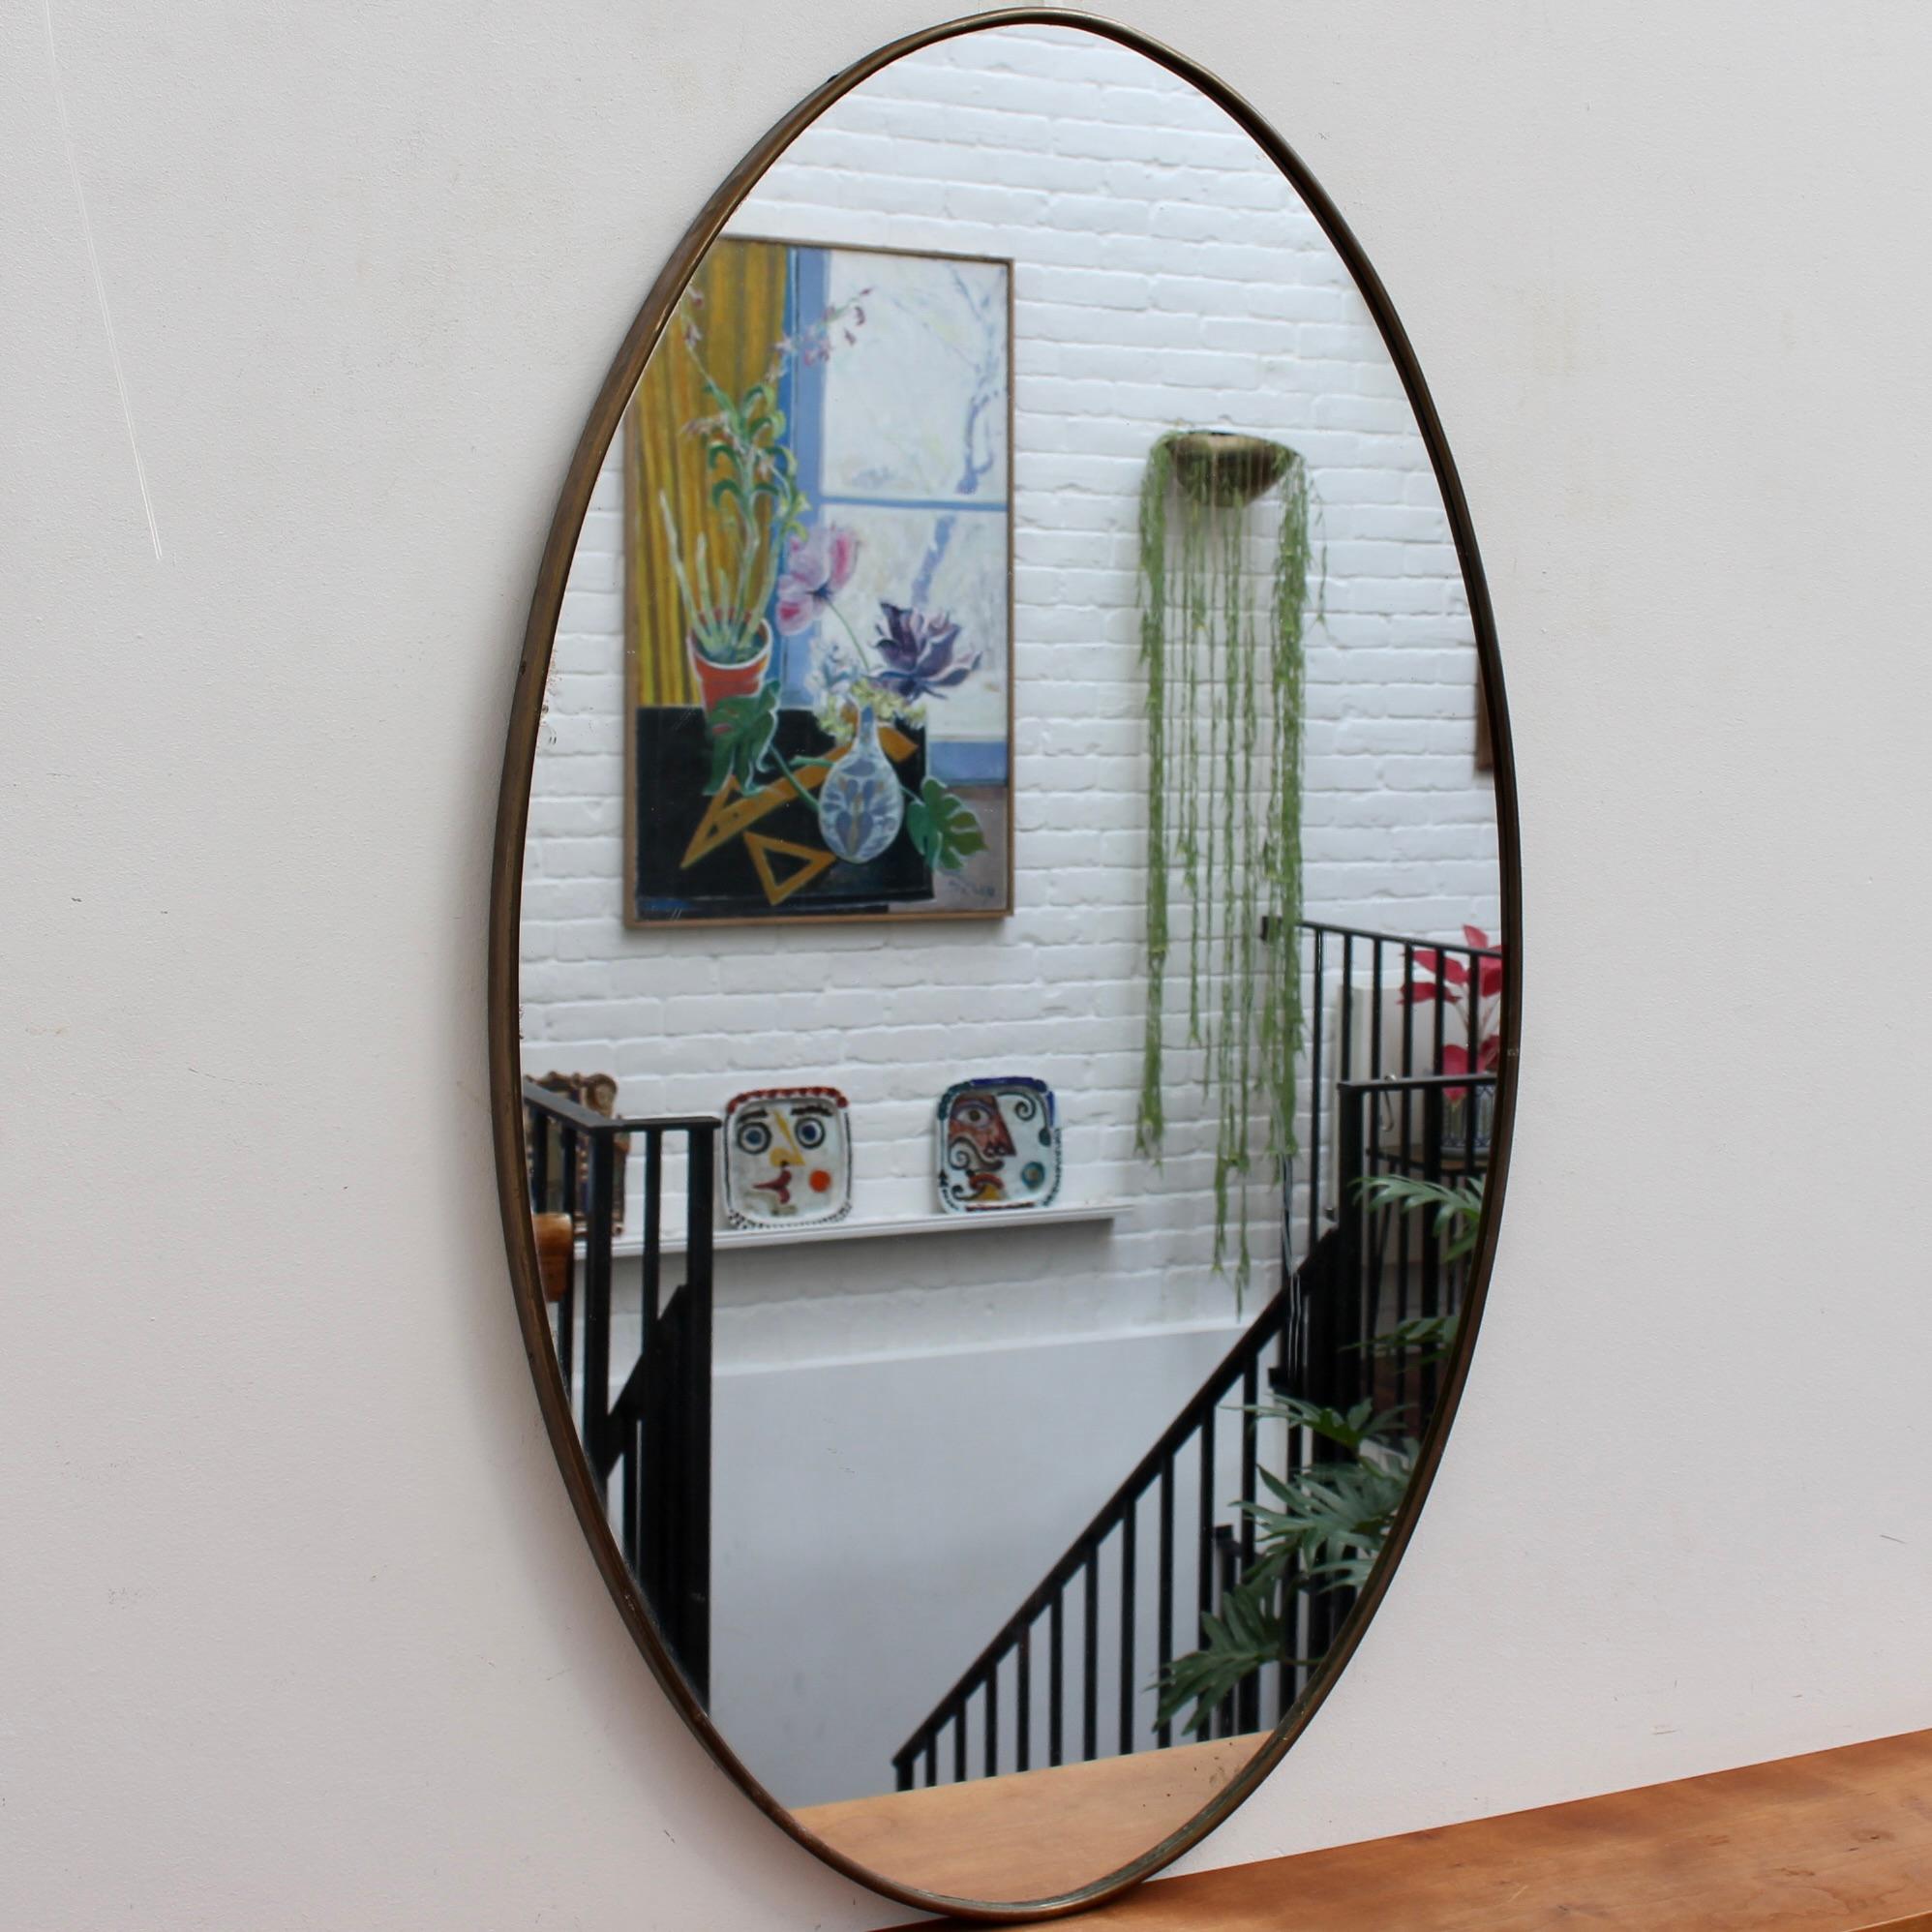 Mid-century Italian wall mirror with brass frame (circa 1950s). The mirror is oval in shape and very smart, with irresistible durability. The visual impression is characterful, elegant and very distinctive in a modern Gio Ponti style. The mirror is